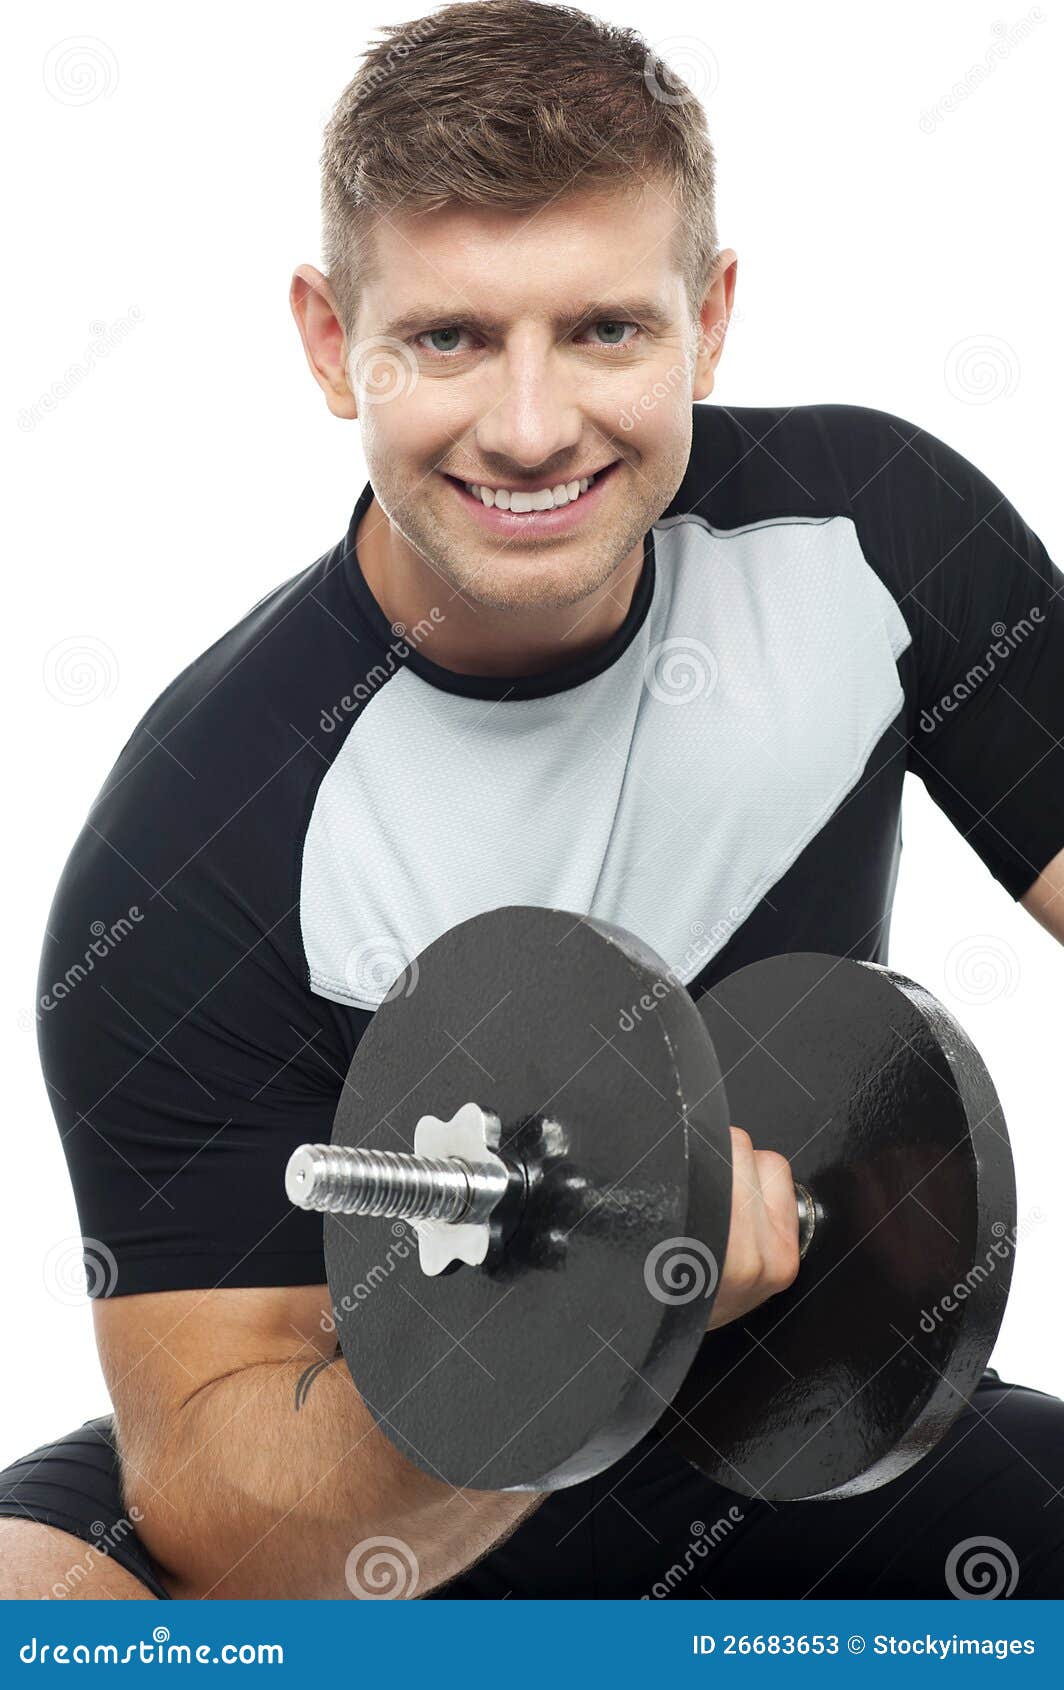 Its workout time stock image. Image of energy, fitness - 26683653